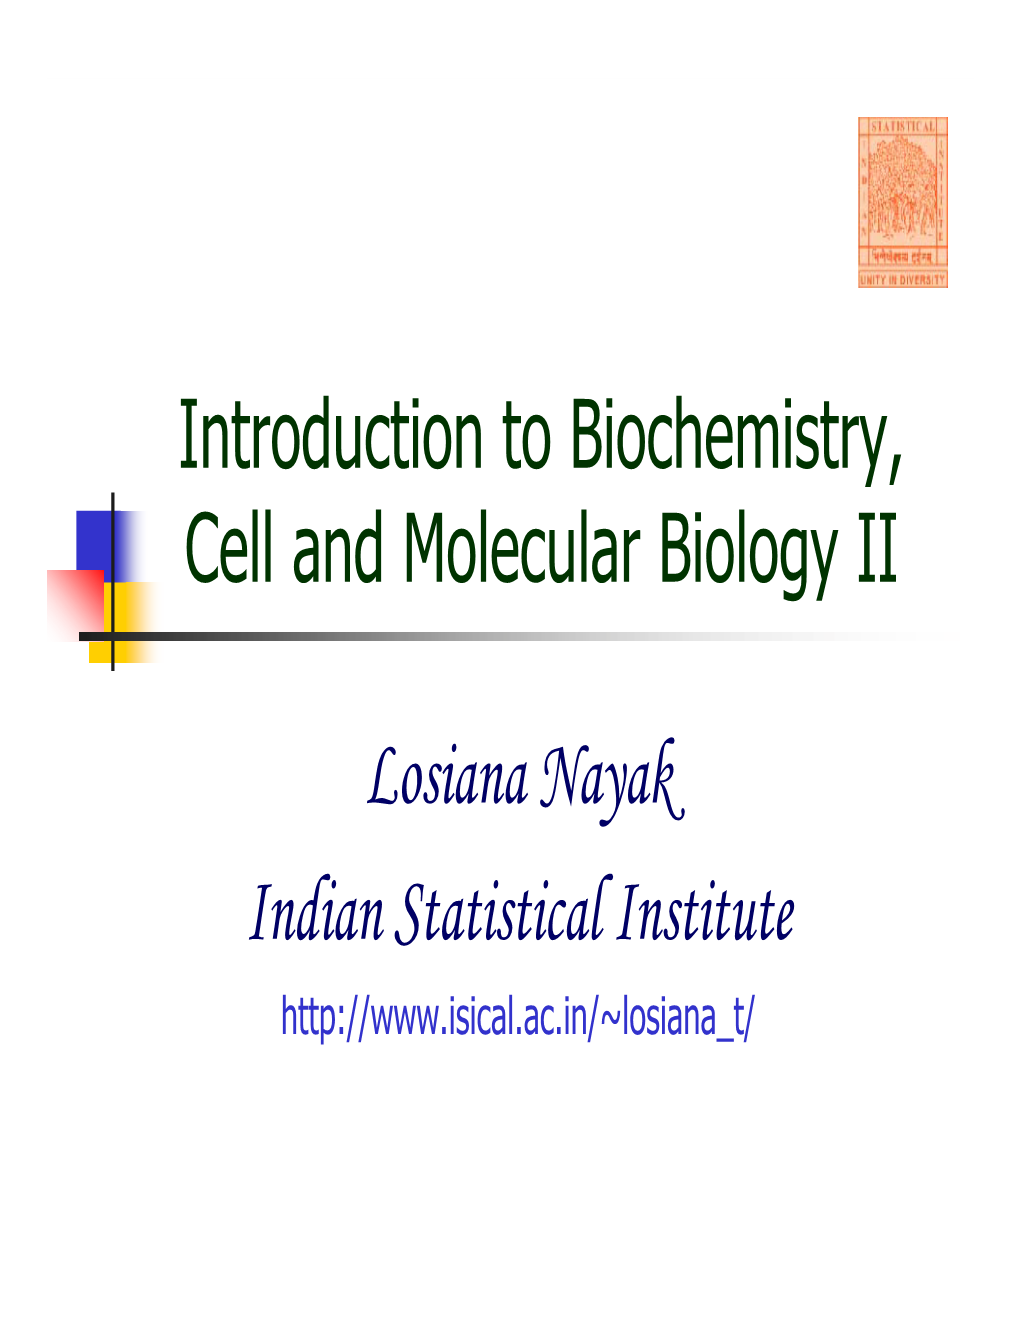 Introduction to Biochemistry, Cell and Molecular Biology II Losiana Nayak